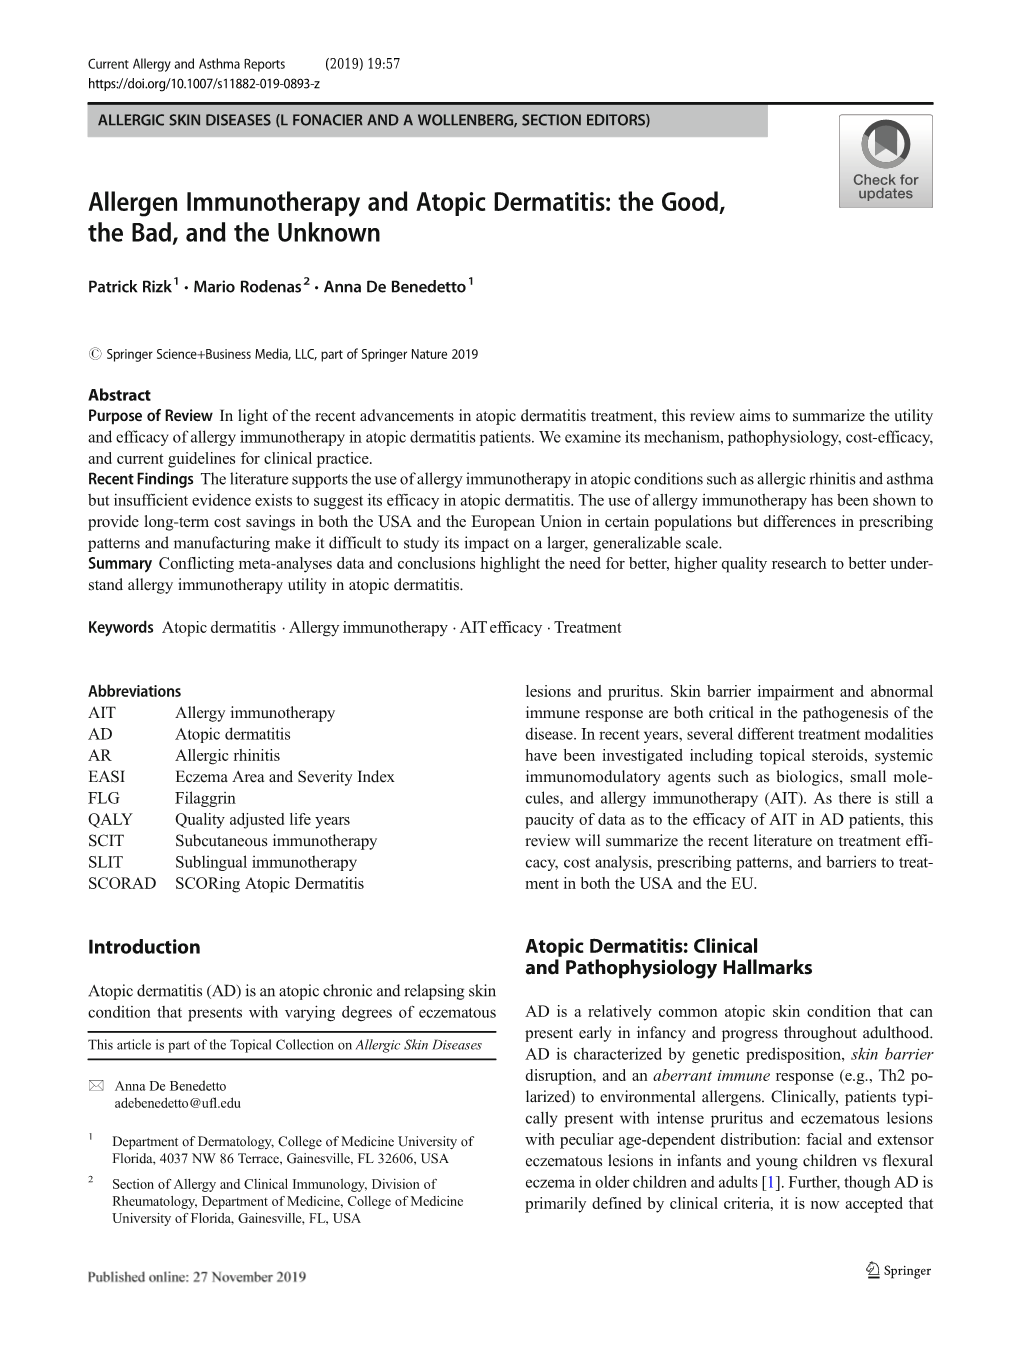 Allergen Immunotherapy and Atopic Dermatitis: the Good, the Bad, and the Unknown